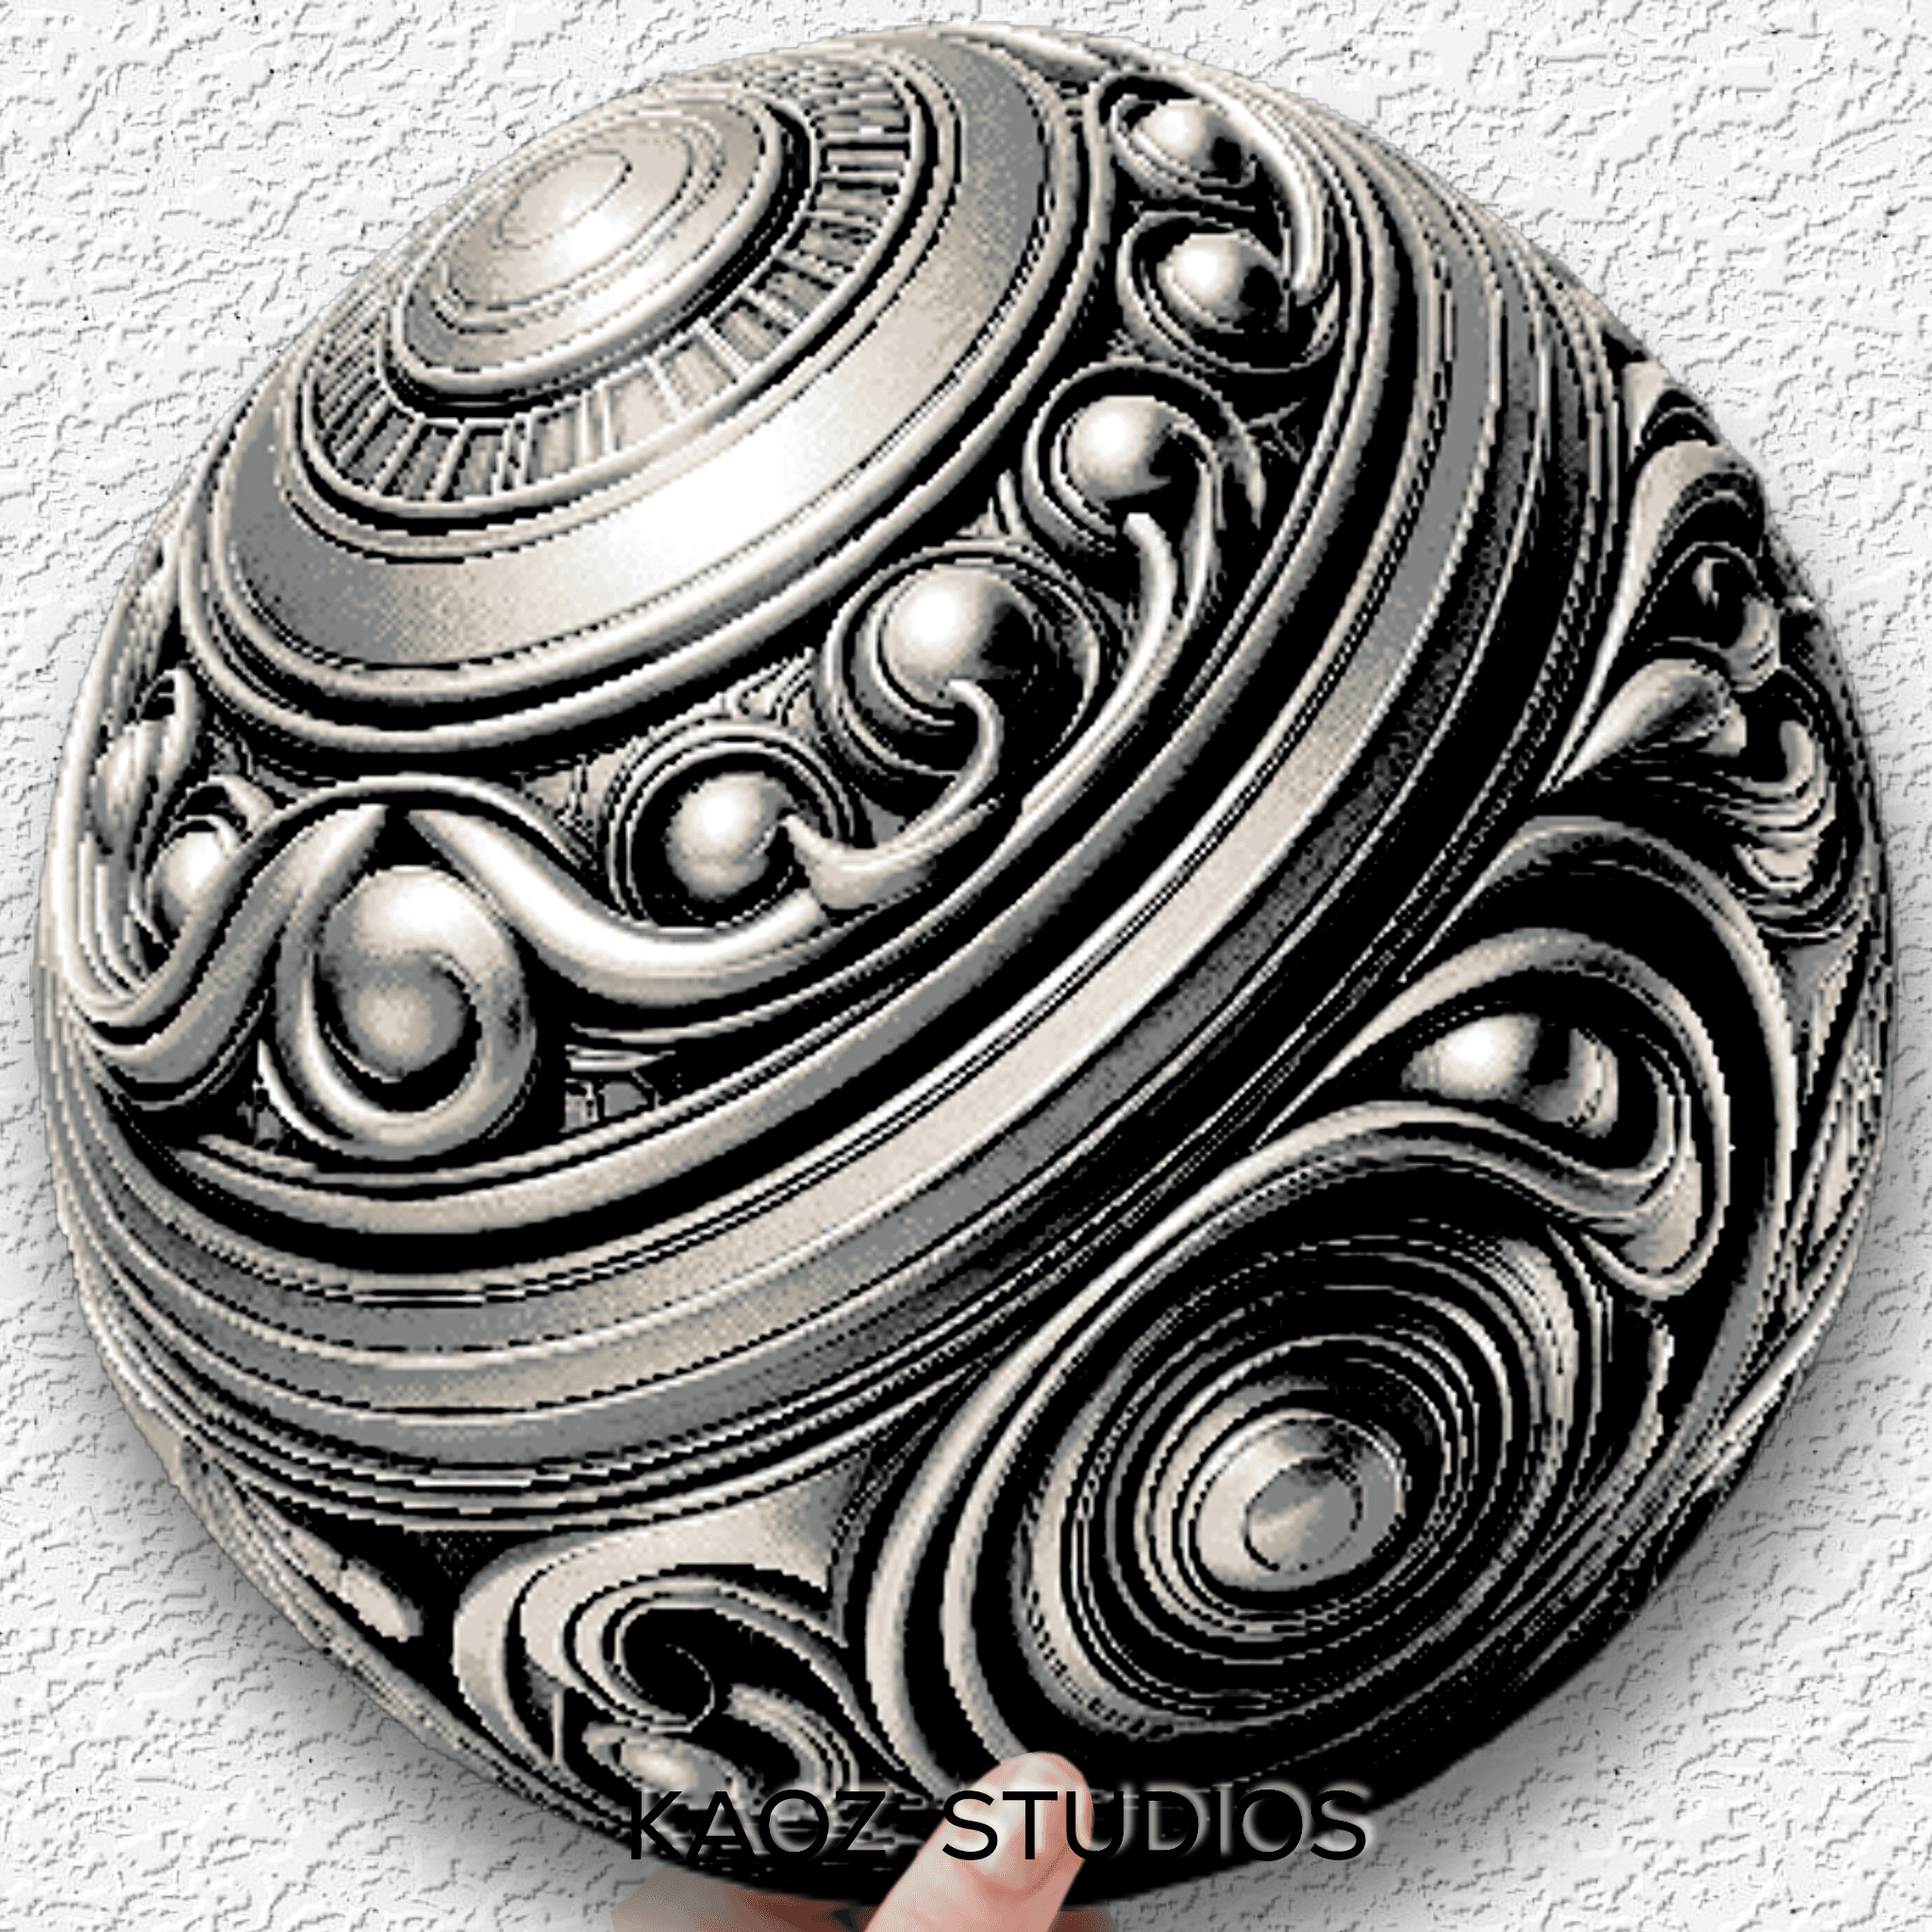 Metal Carved Sphere Optical Illusion Hueforge Art - easy to print 3d model